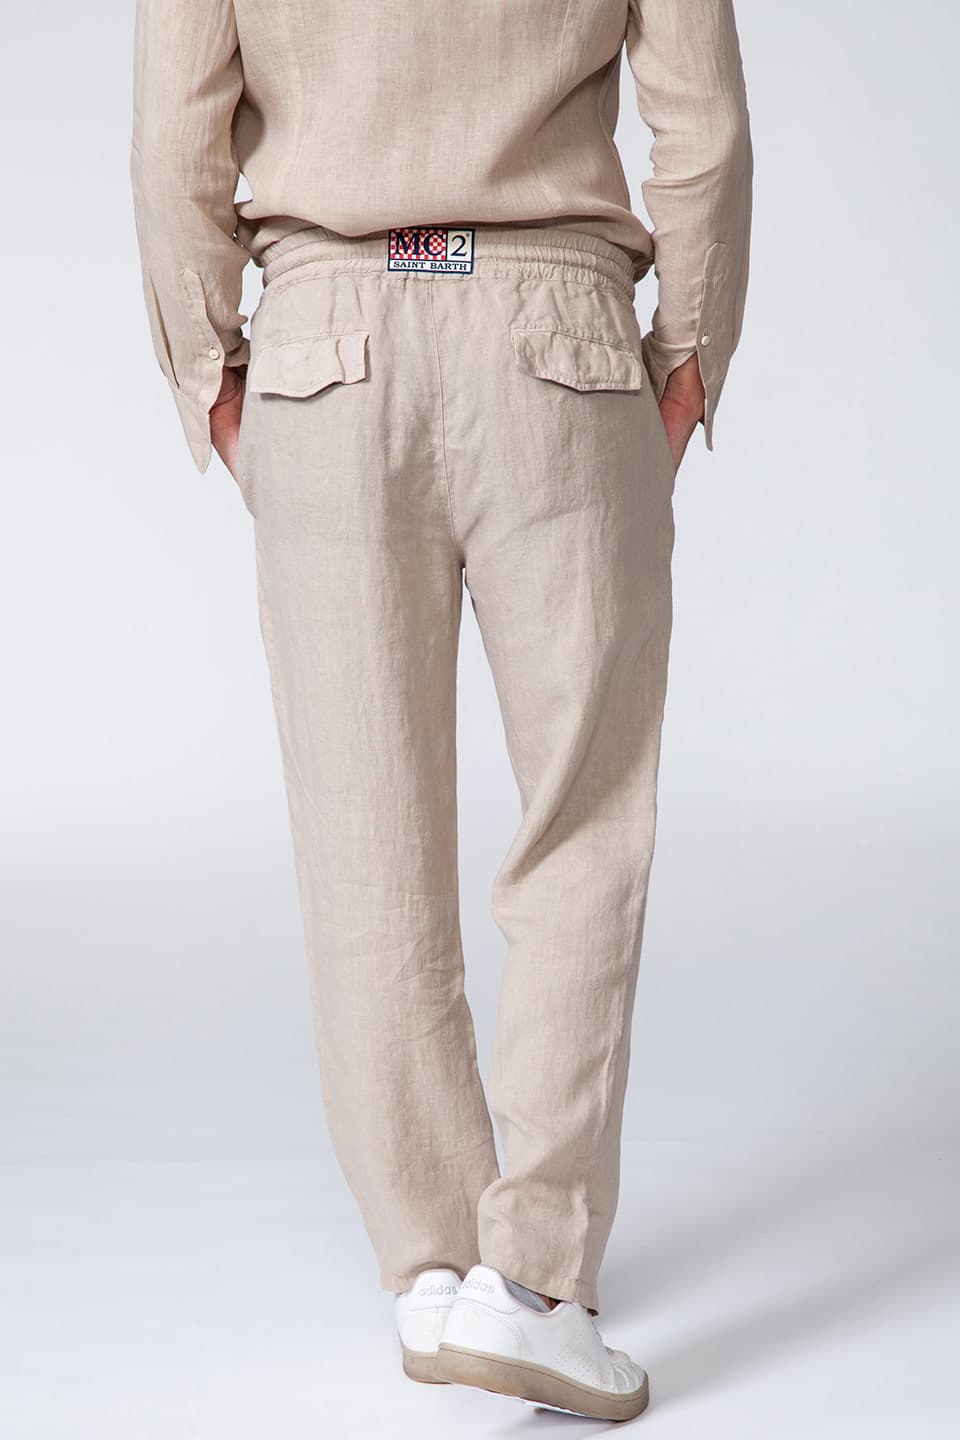 Thumbnail for Product gallery 2, MC saint barth male calais trousers beige back